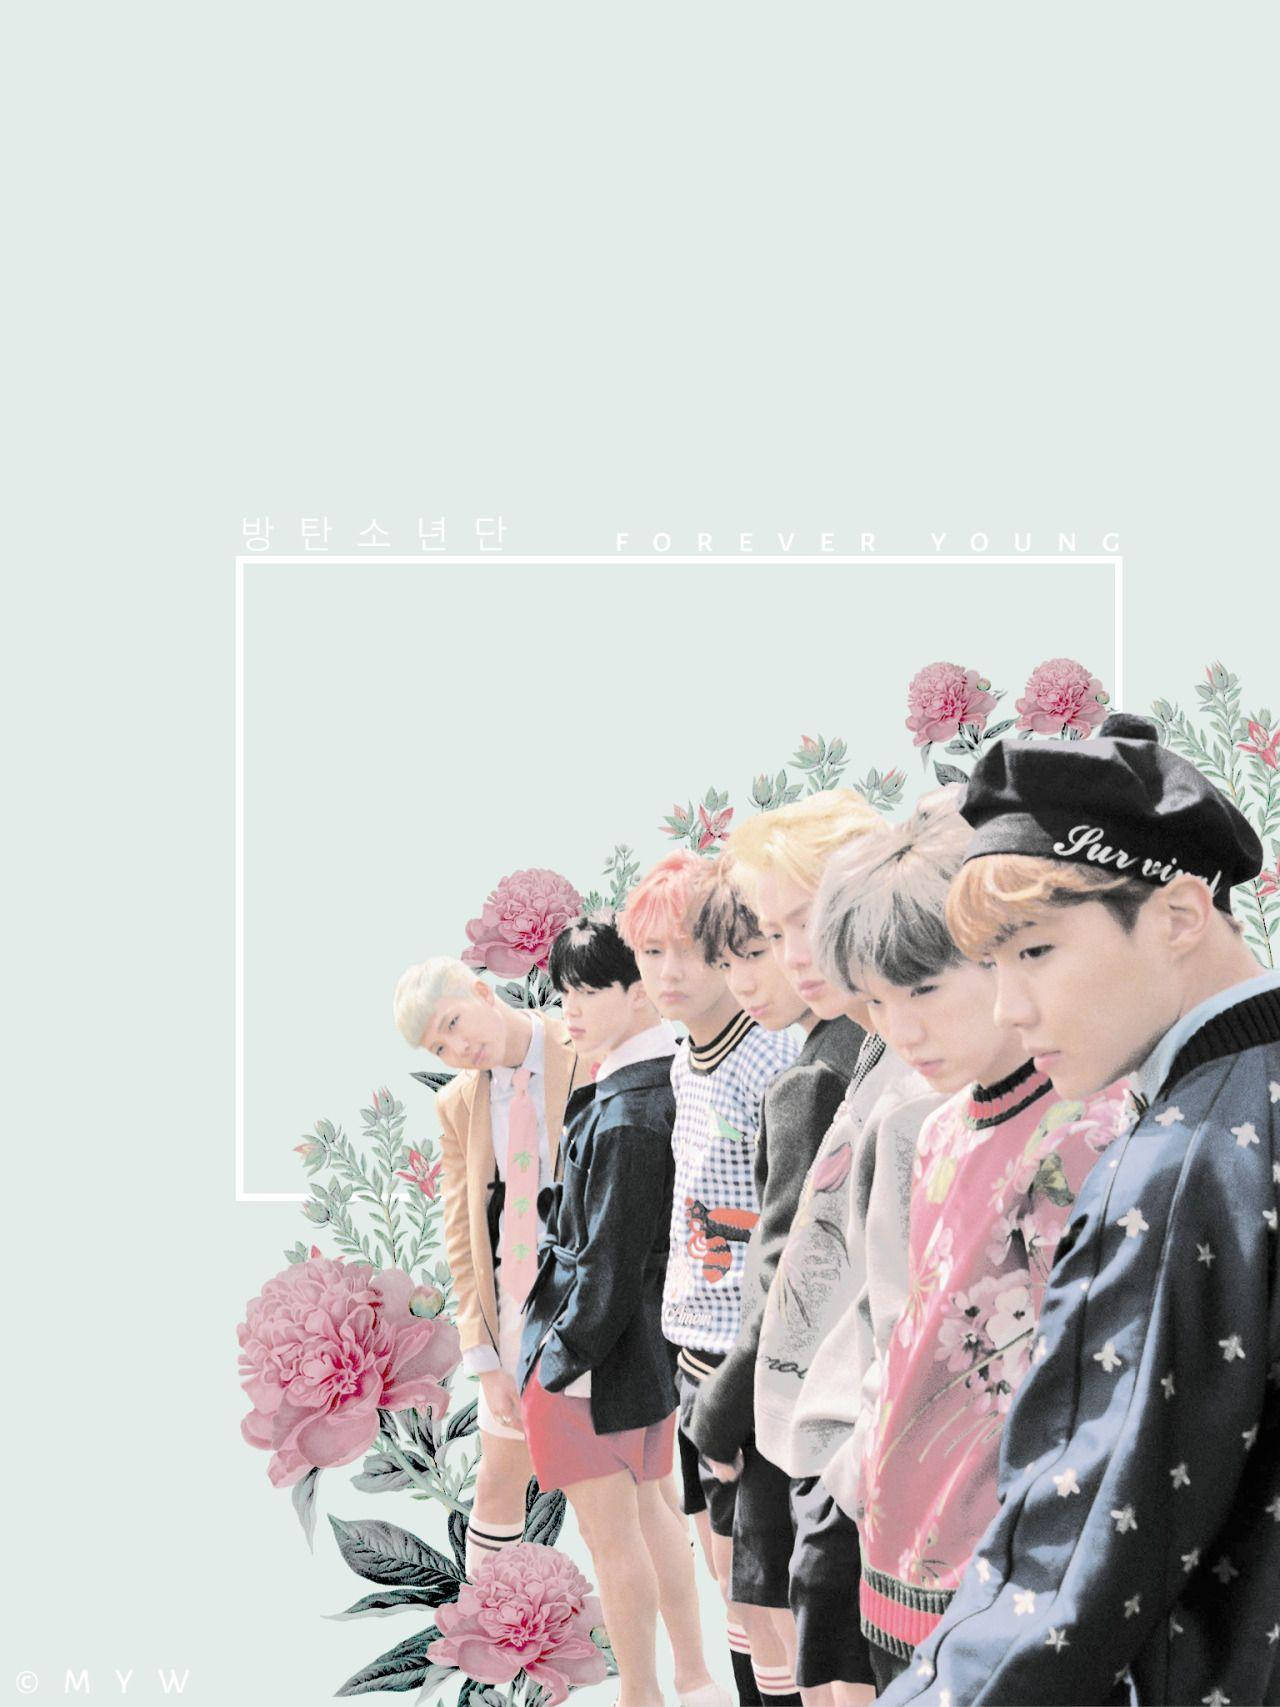 Bts 1280X1707 Wallpaper and Background Image